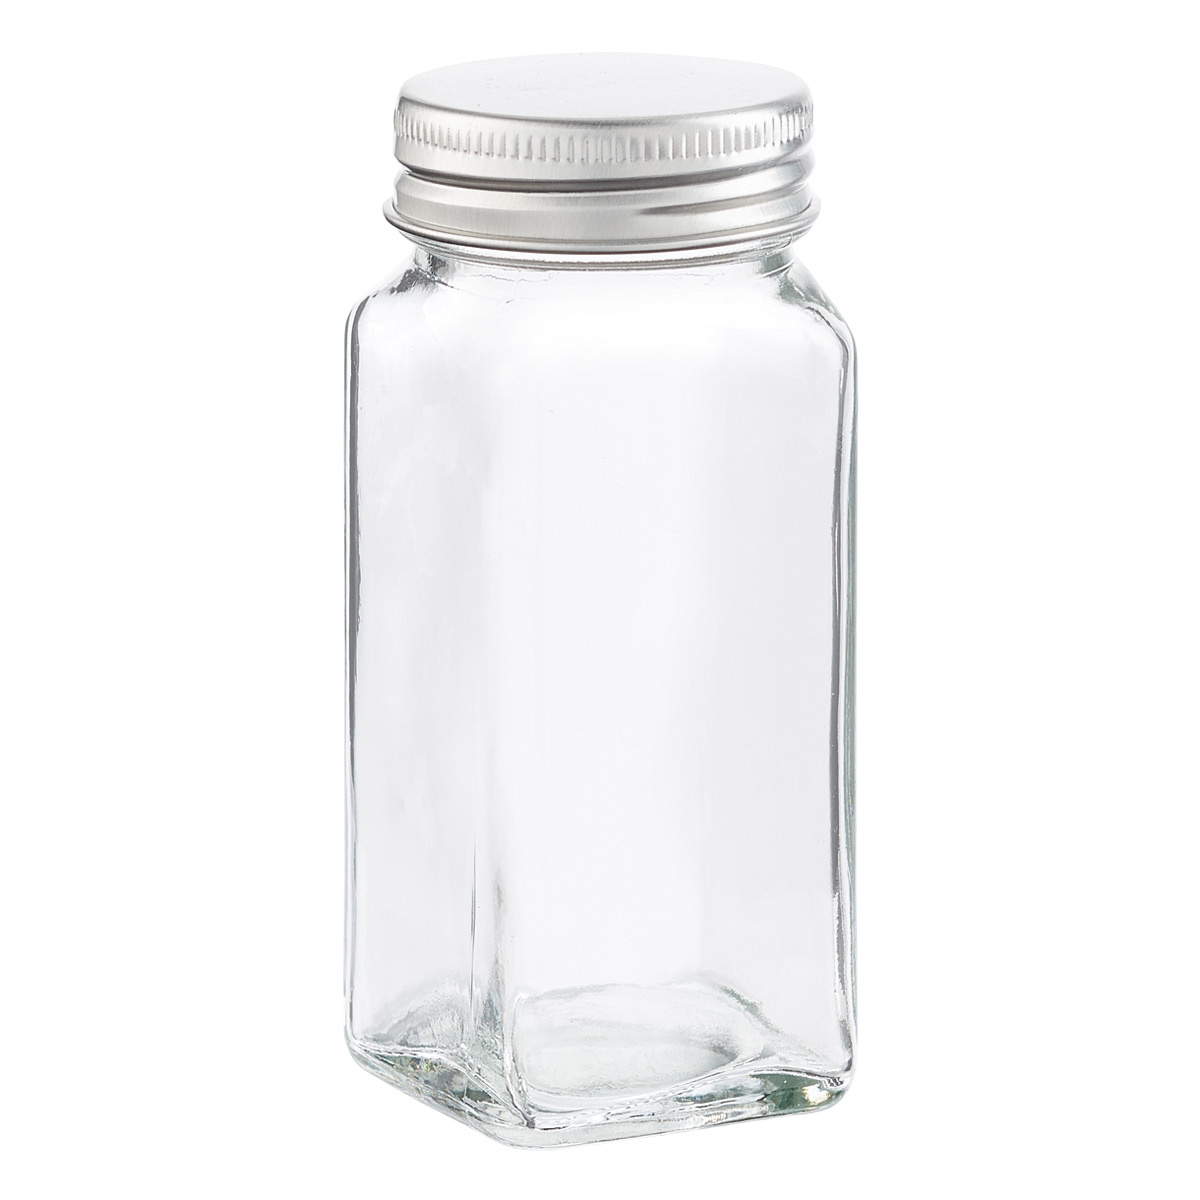 https://www.containerstore.com/catalogimages/433240/10085715_3-Oz_Spice_Jar_with_Aluminu.jpg